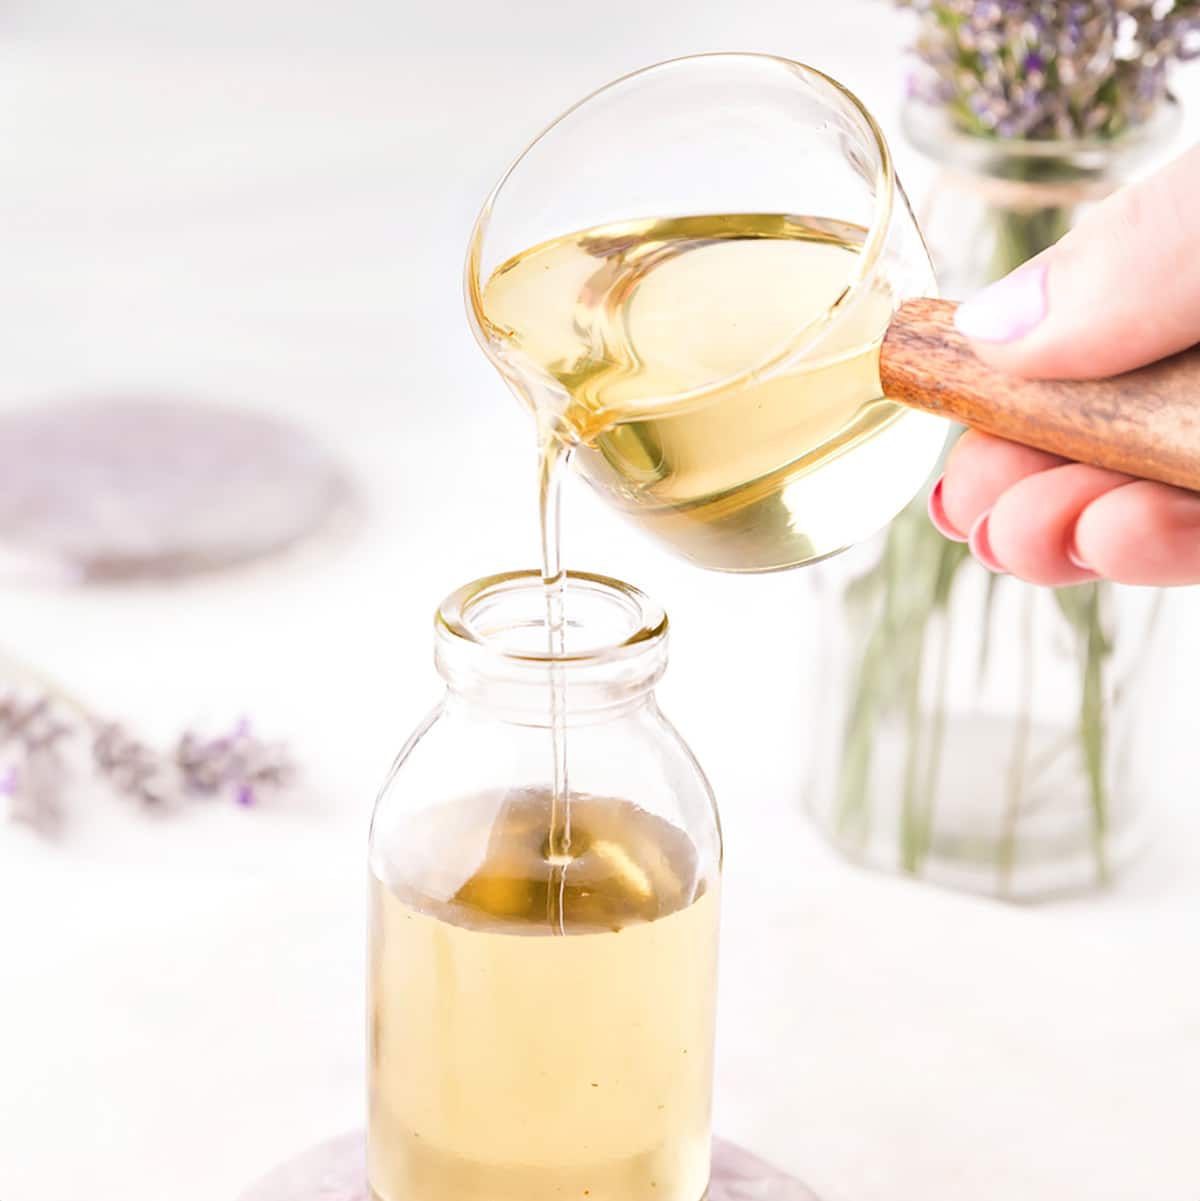 Pouring lavender simple syrup from a measuring cup into a glass jar.